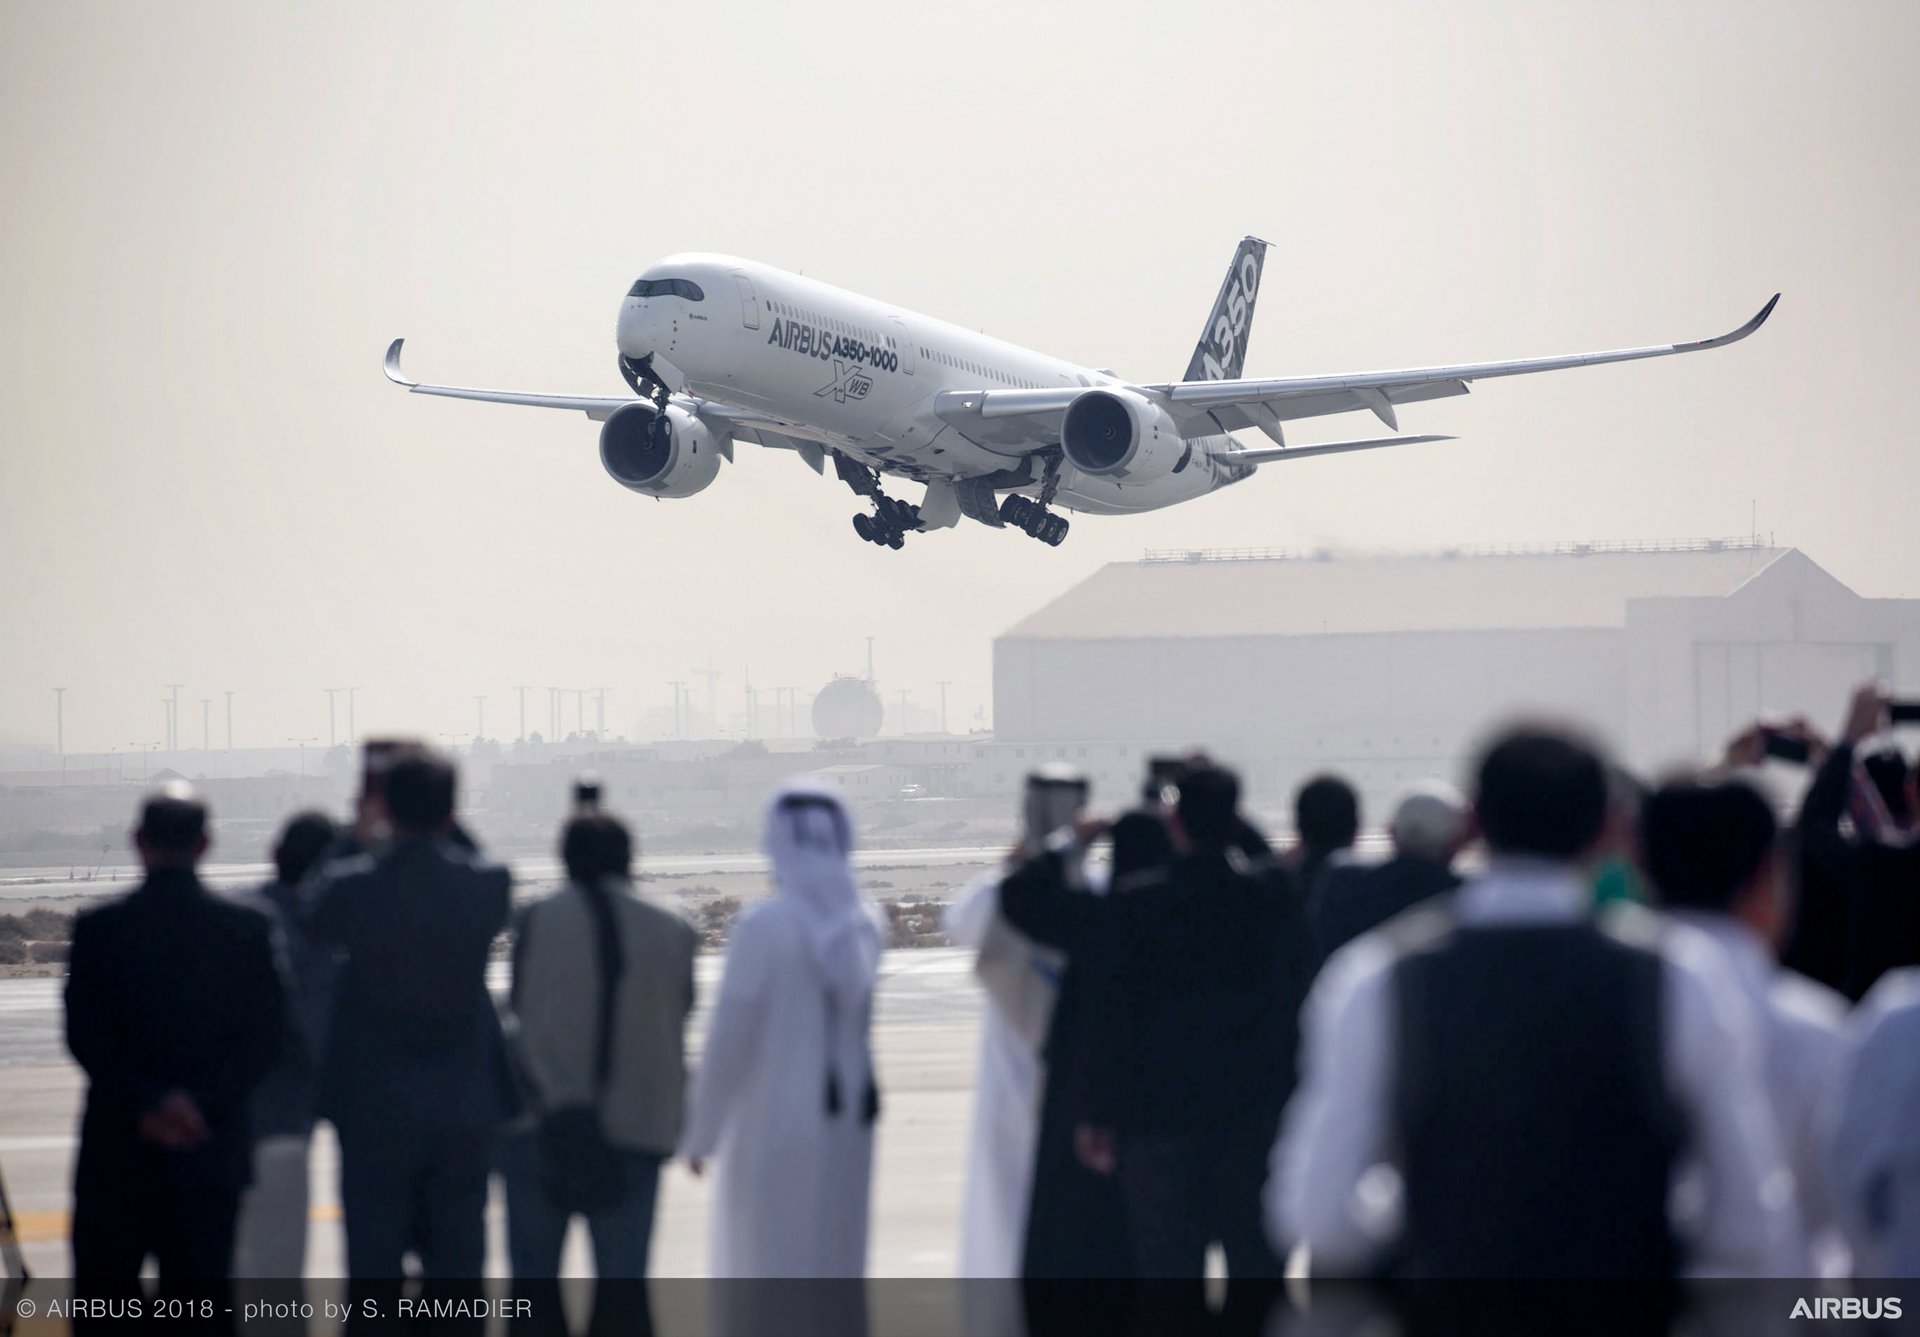 Airbus’ growing A350 XWB Family makes its mark